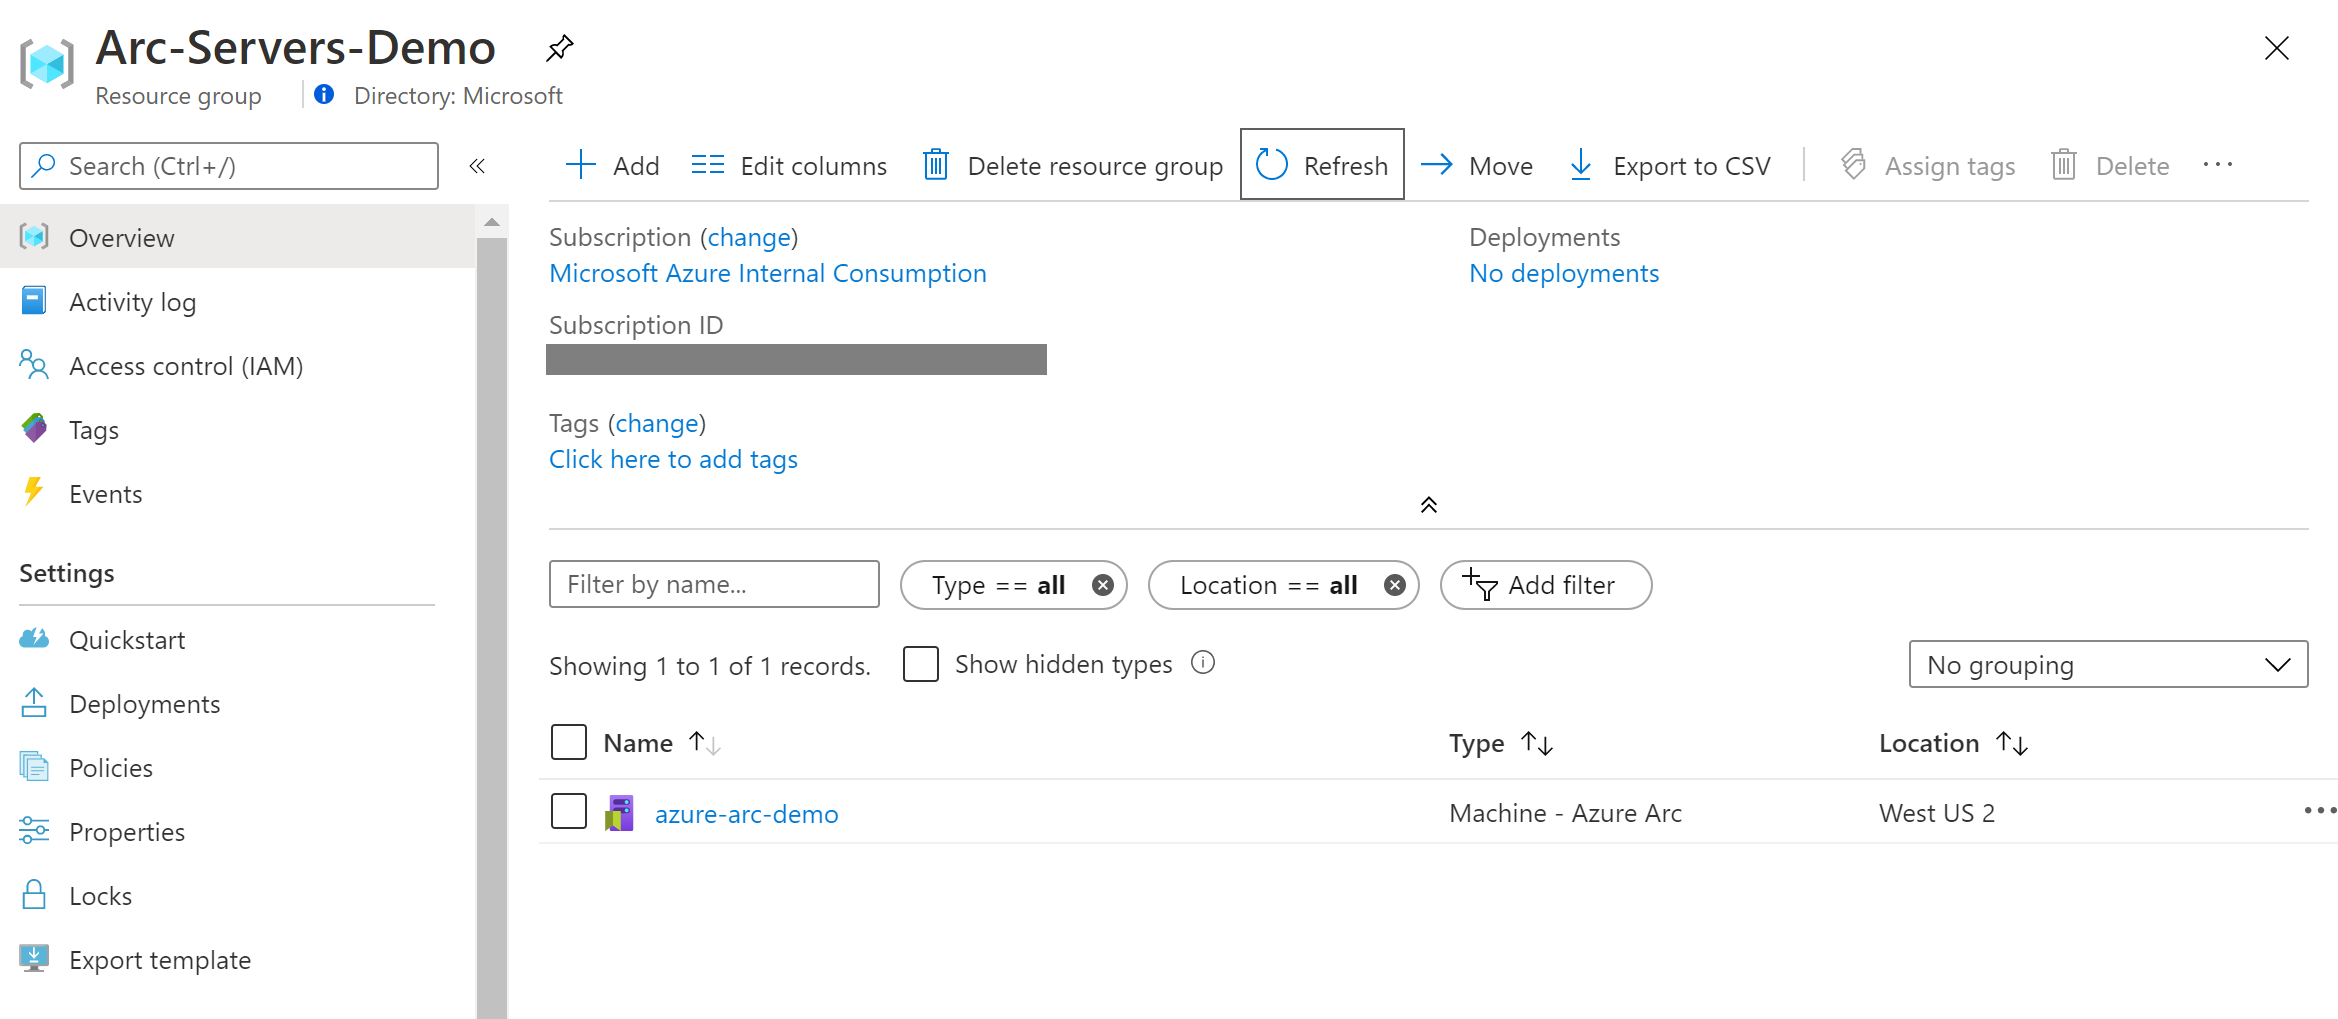 A screenshot showing an Azure Arc-enabled server in the Azure portal.